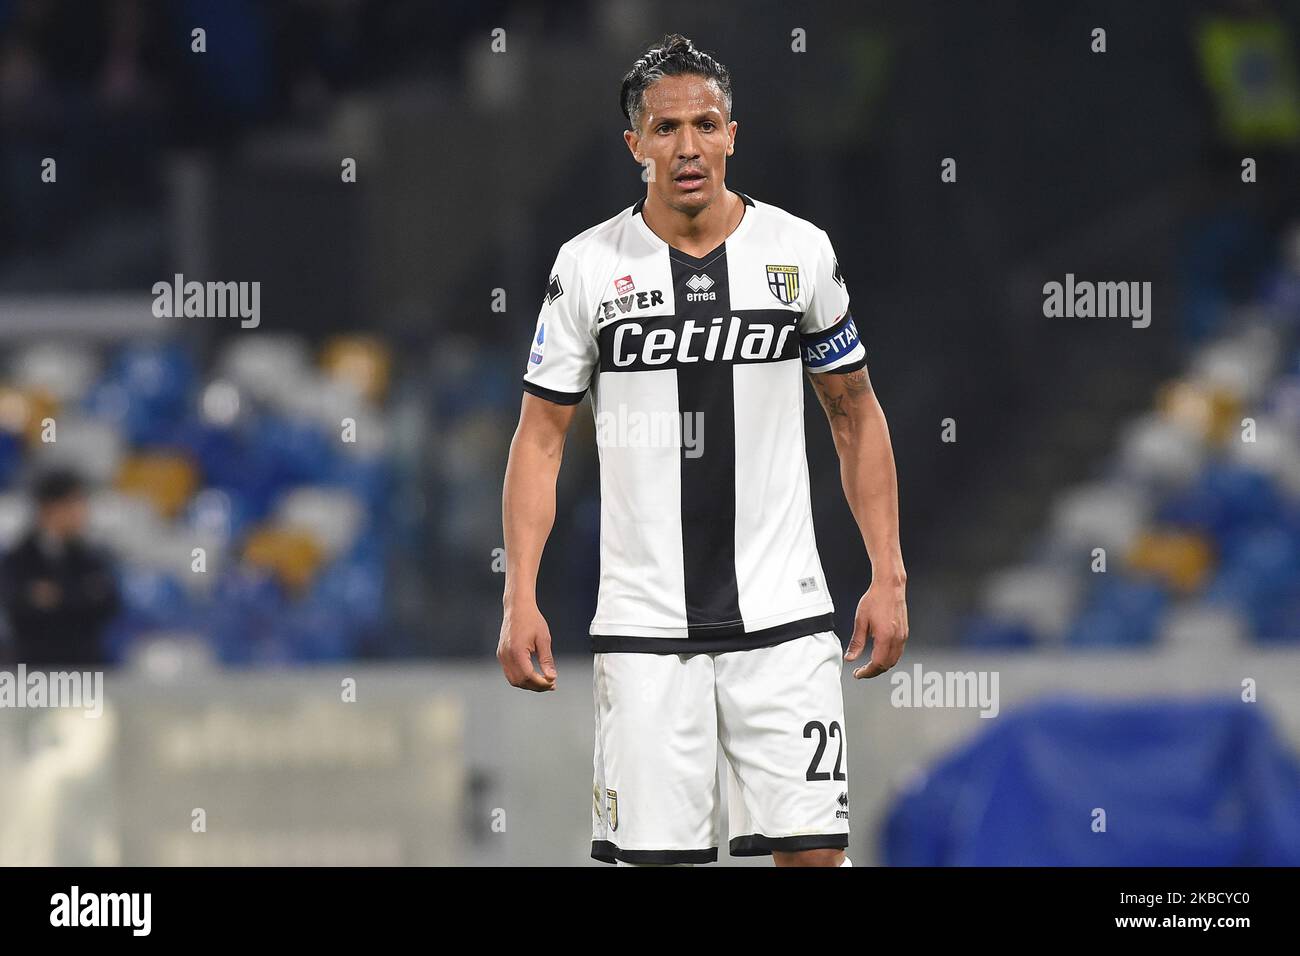 Bruno Alves of Parma Calcio during the Serie A match between SSC Napoli and Parma Calcio at Stadio San Paolo Naples Italy on 14 December 2019. (Photo by Franco Romano/NurPhoto) Stock Photo